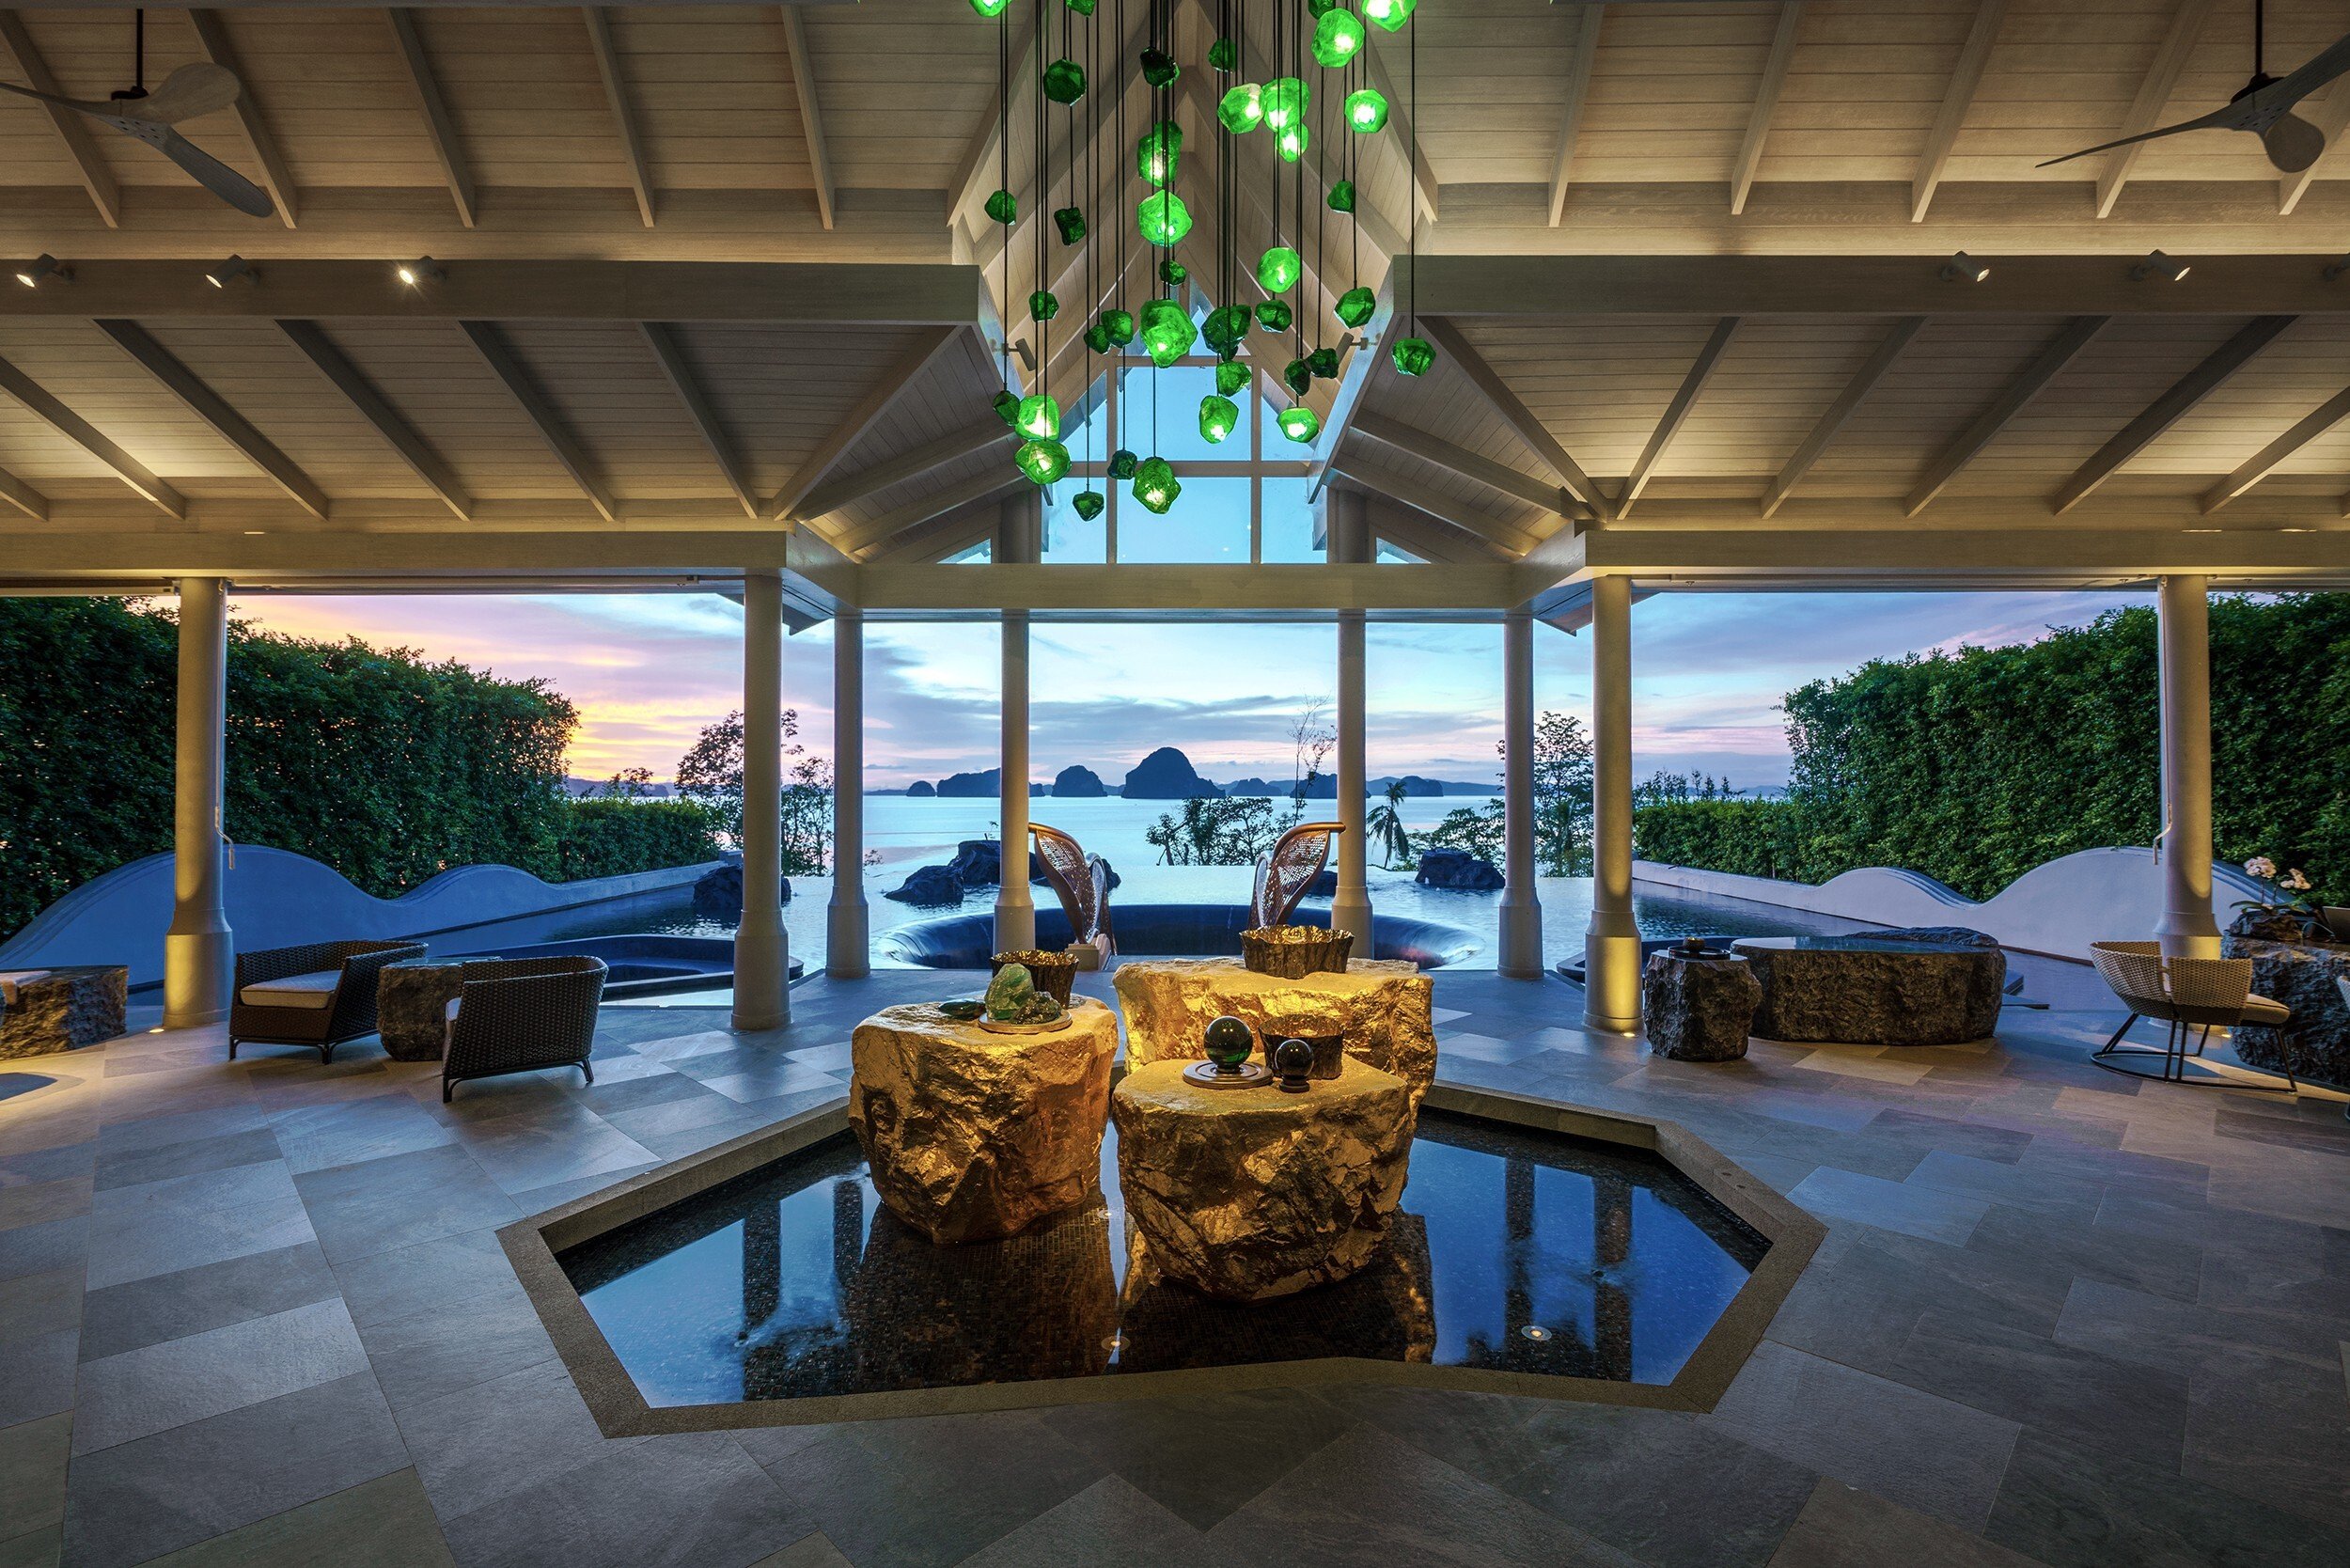 The Banyan Tree Krabi in Thailand, one of the new or revamped regional hotels Hongkongers can look forward to staying in when borders reopen. Photo: Banyan Tree Krabi